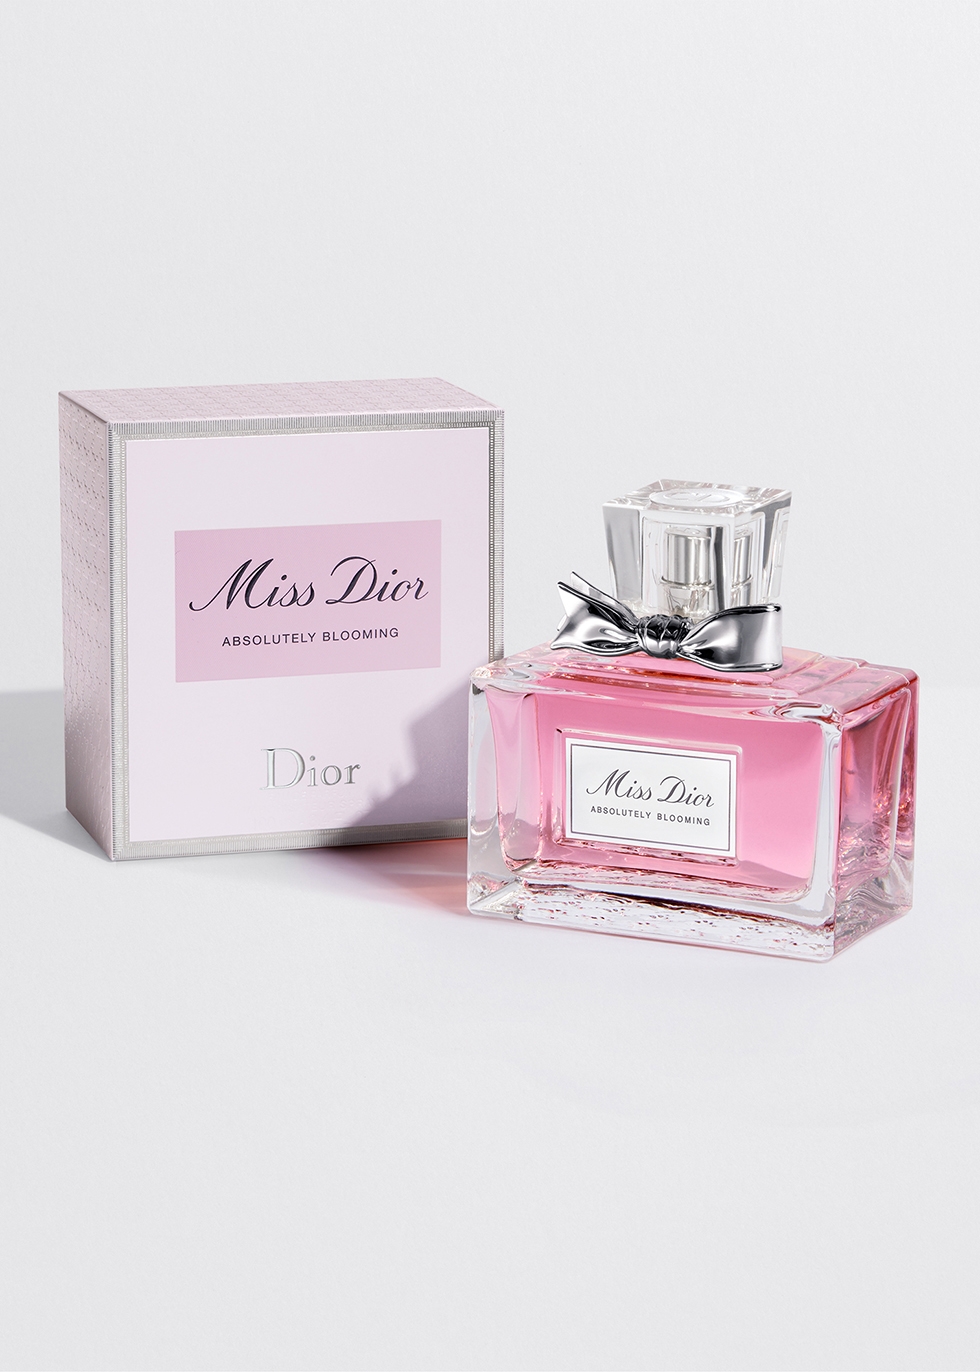 miss dior absolutely blooming gift set